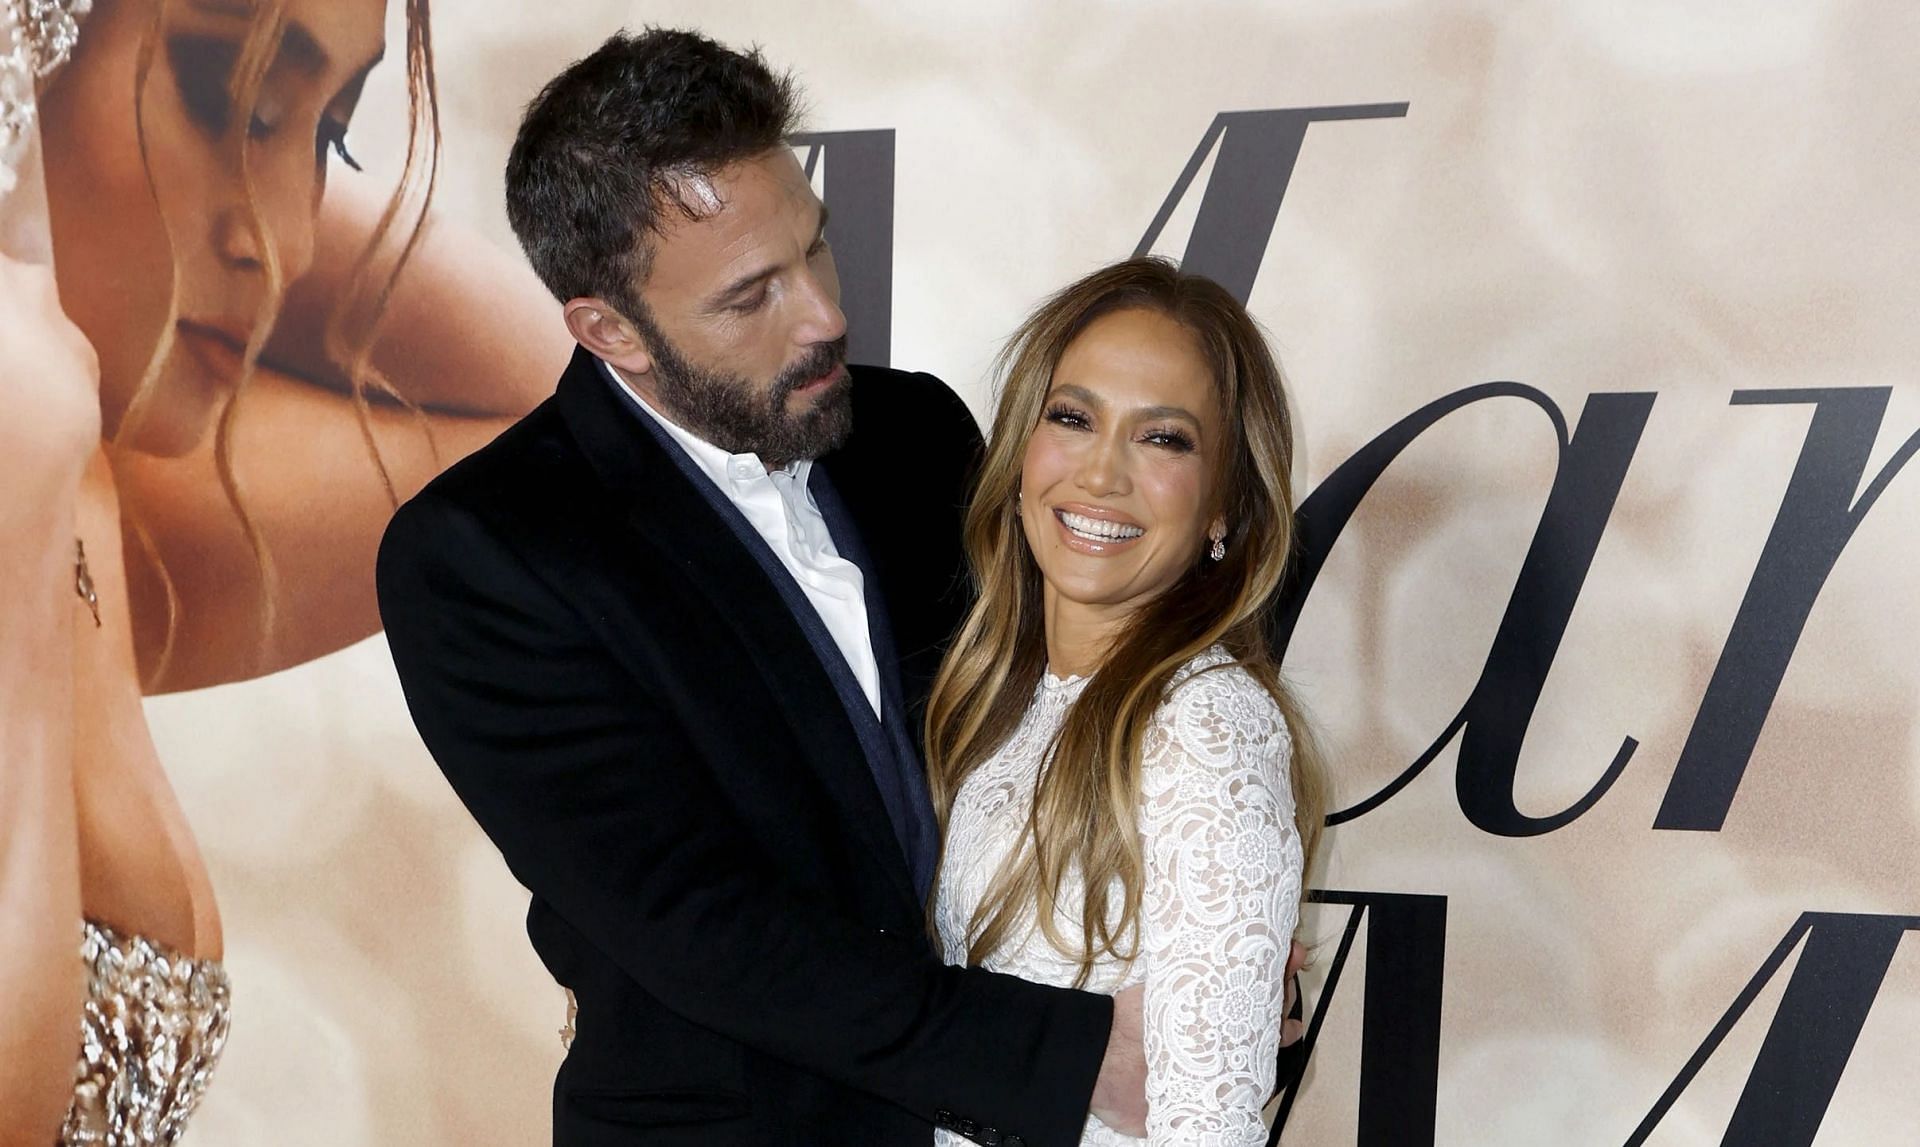 Ben Affleck and Jennifer Lopez at the February premiere of her new film &#039;Marry Me&#039; (Image via Frazer Harrison/Getty Images)marry